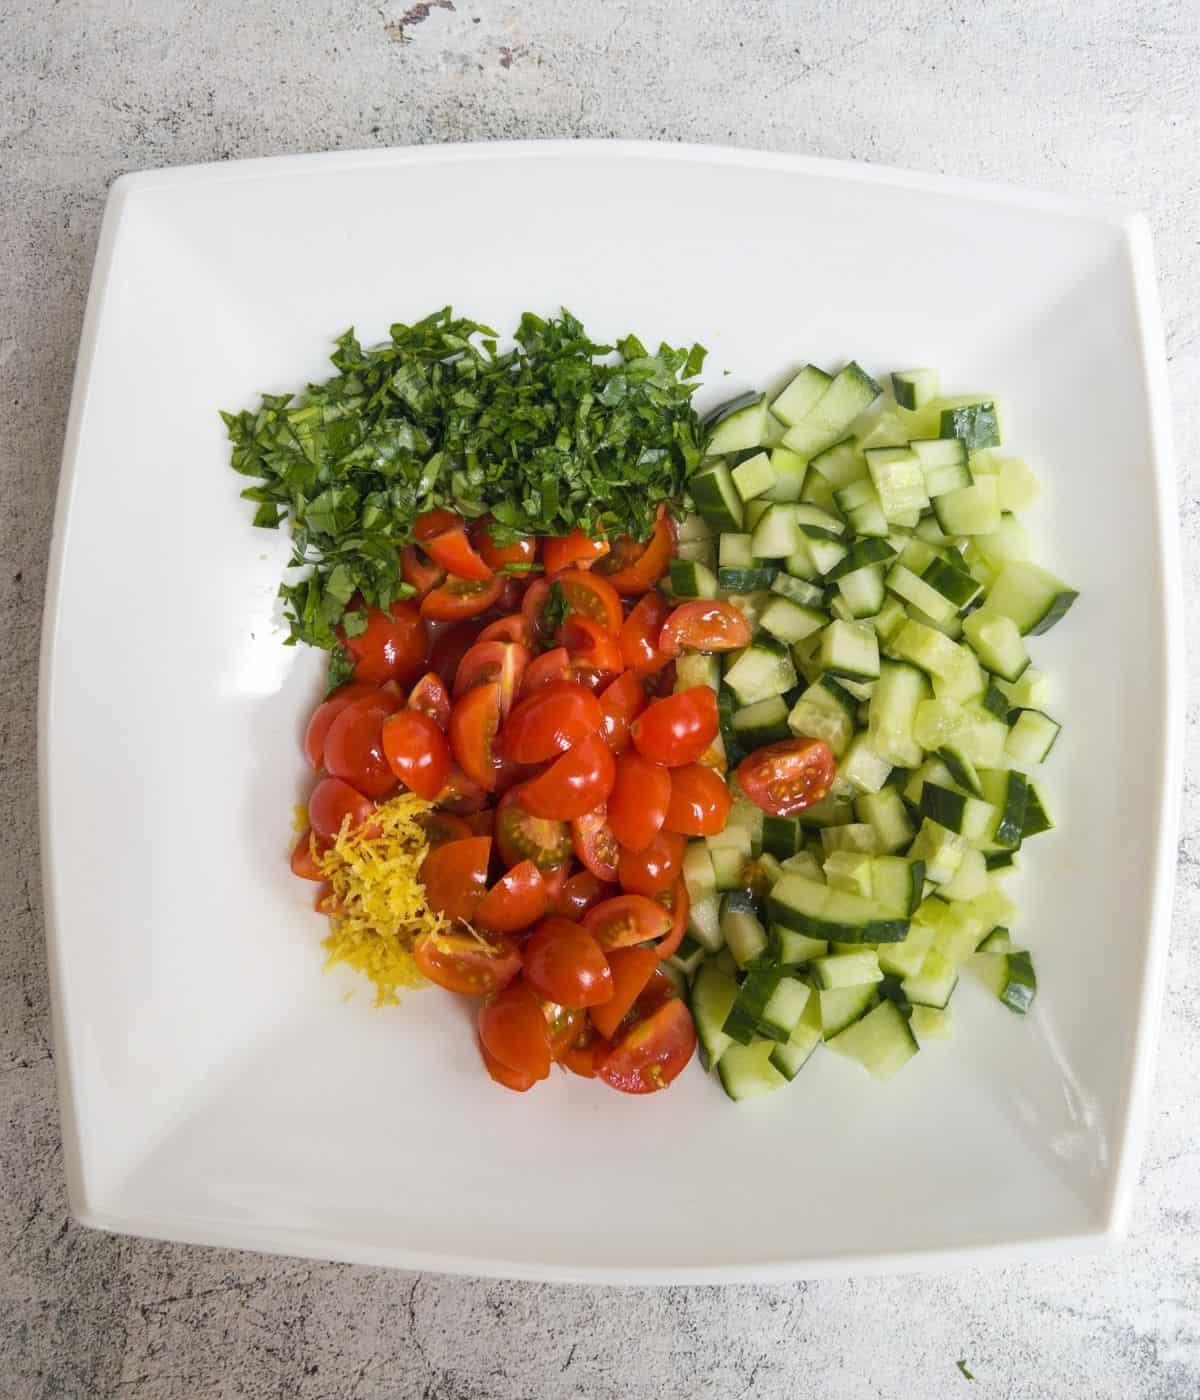 Chopped tomatoes, cucumber, basil parsley and lemon in a white bowl